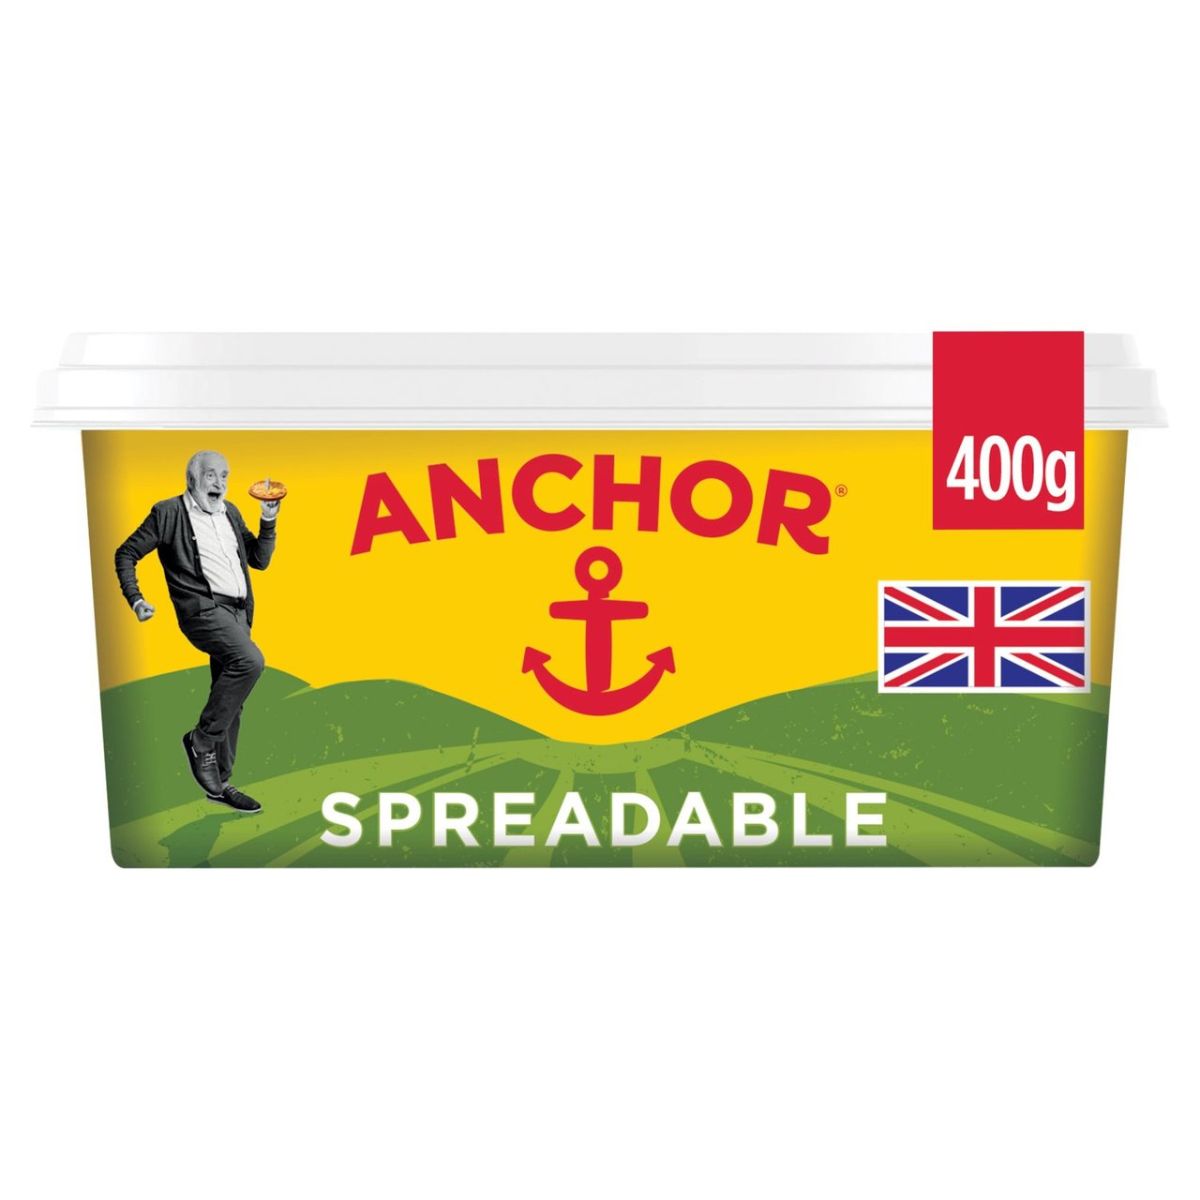 Anchor - Spreadable Blend of Butter and Rapeseed Oil - 400g.